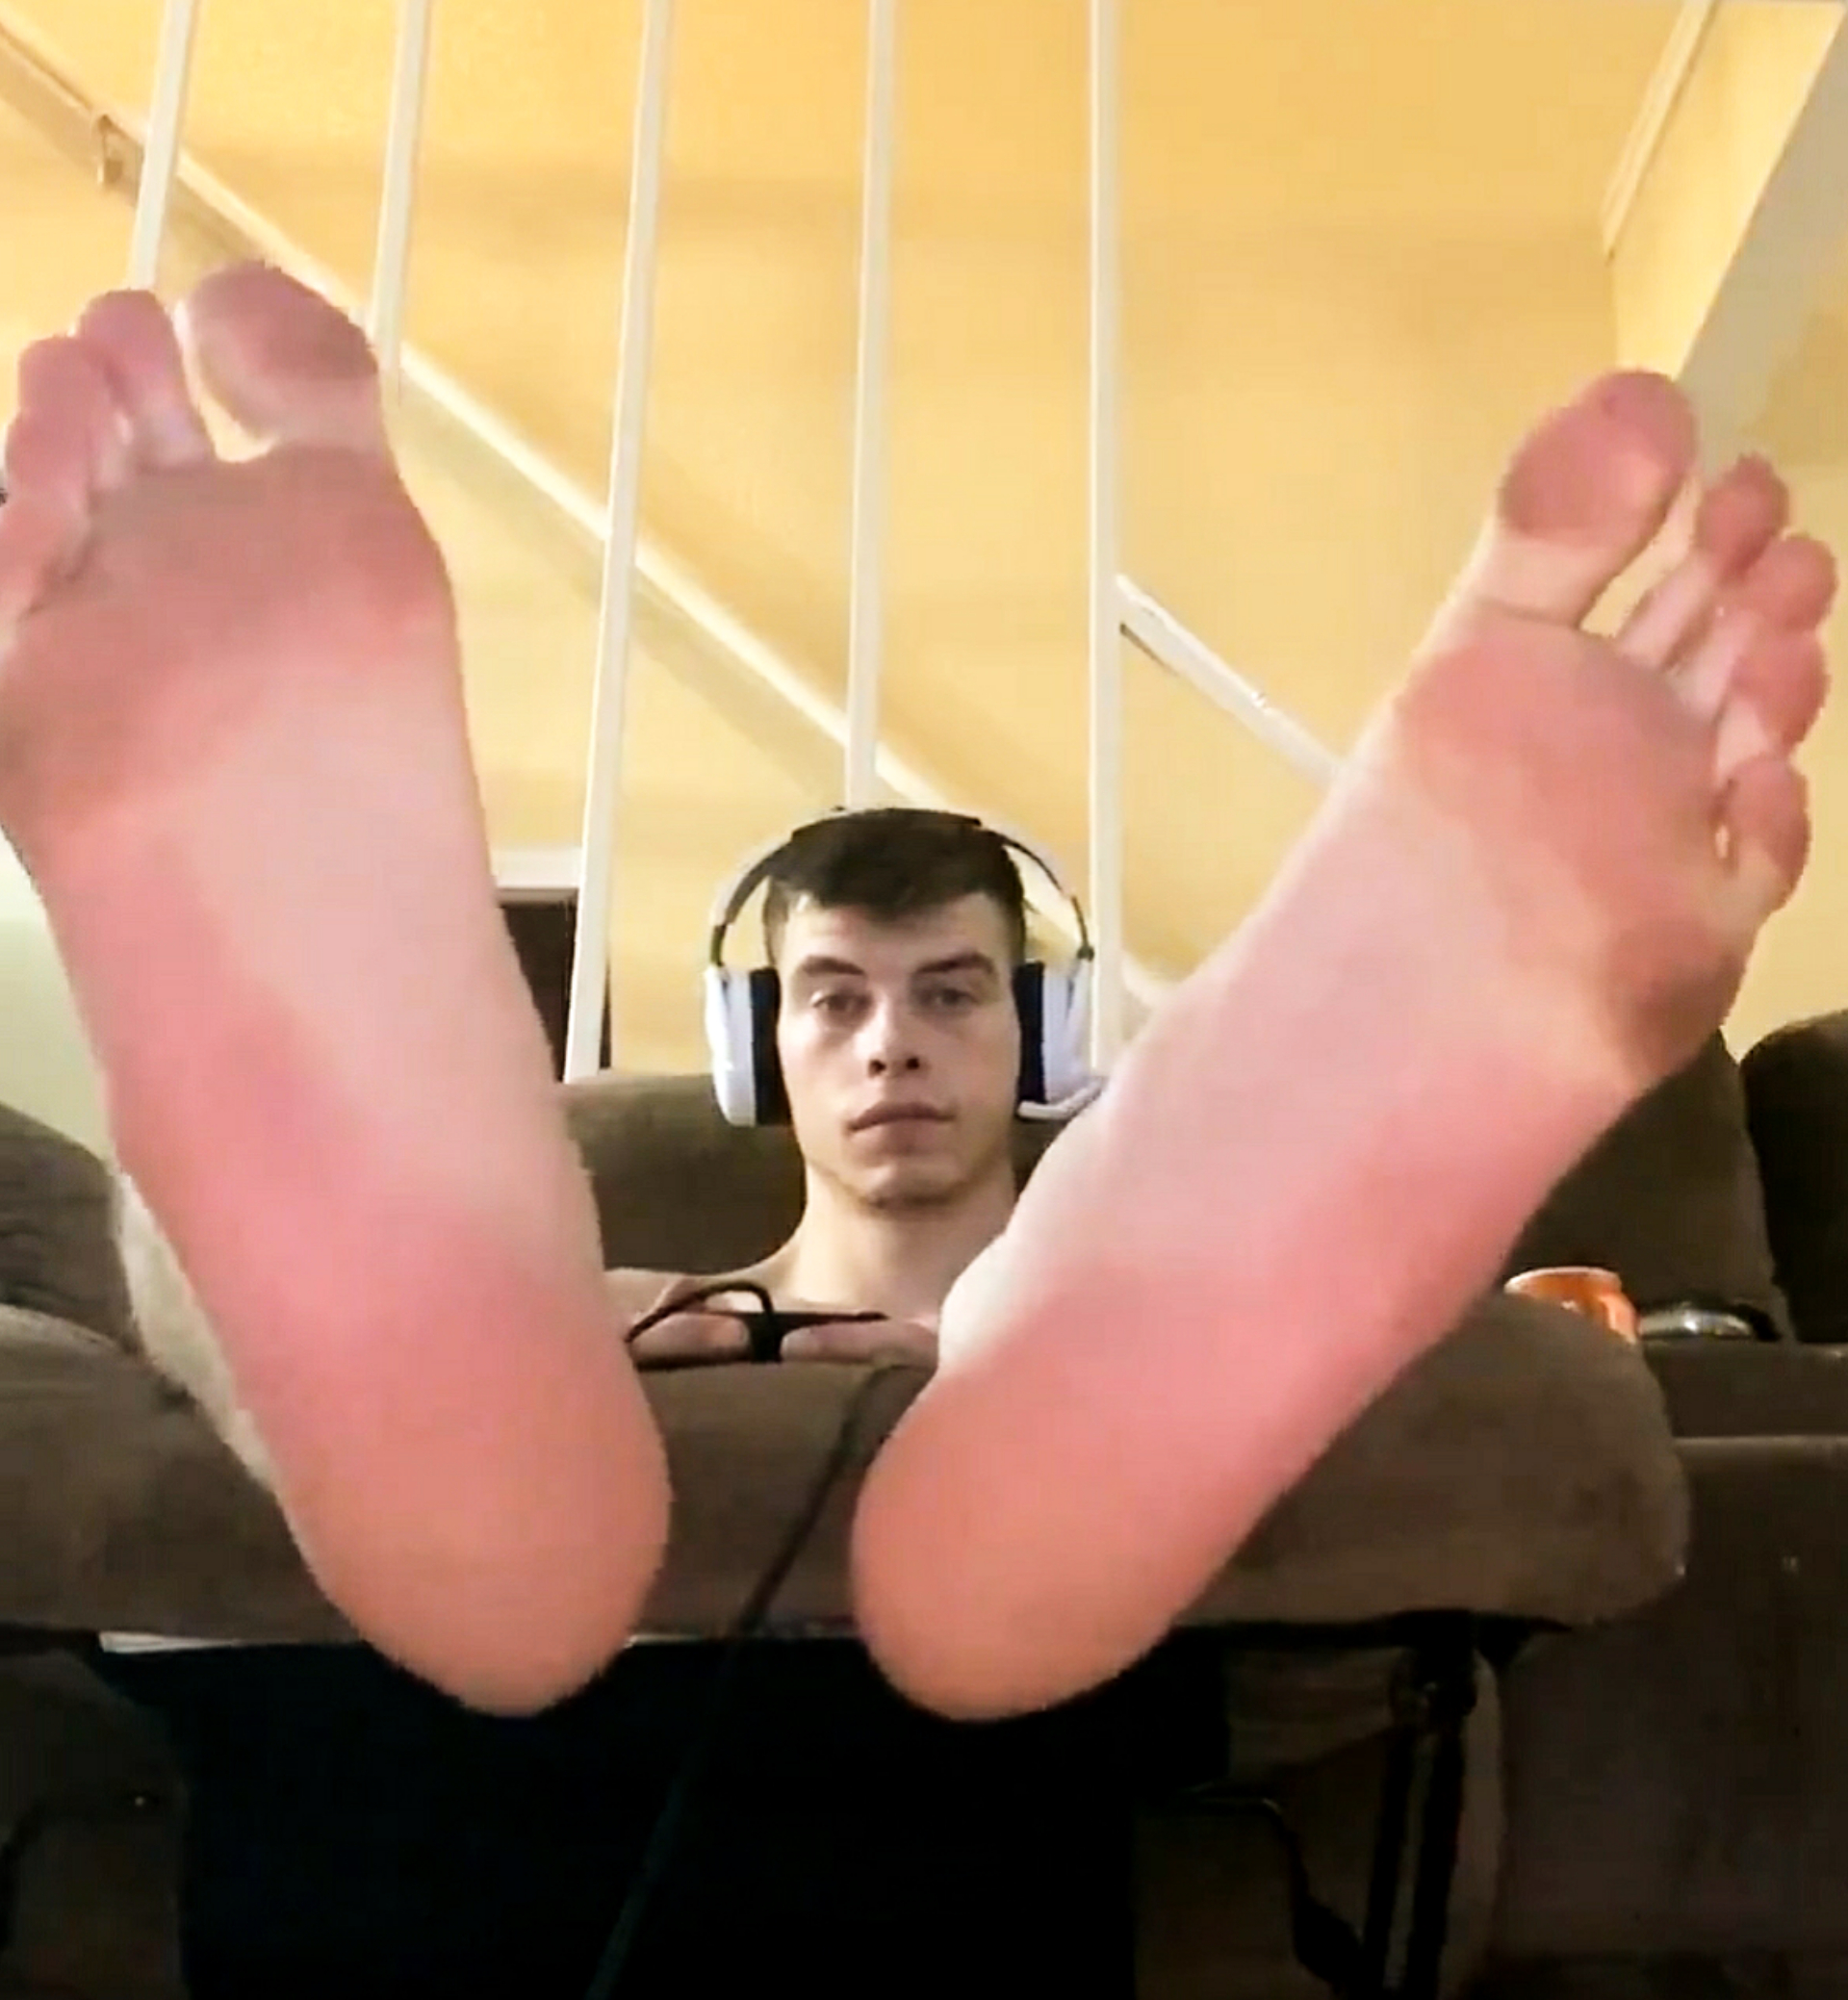 Barefoot Gay Lovers - Feet Lover: SIZE 18 FEET TALL GUY LONG SOLES! - ThisVid.com